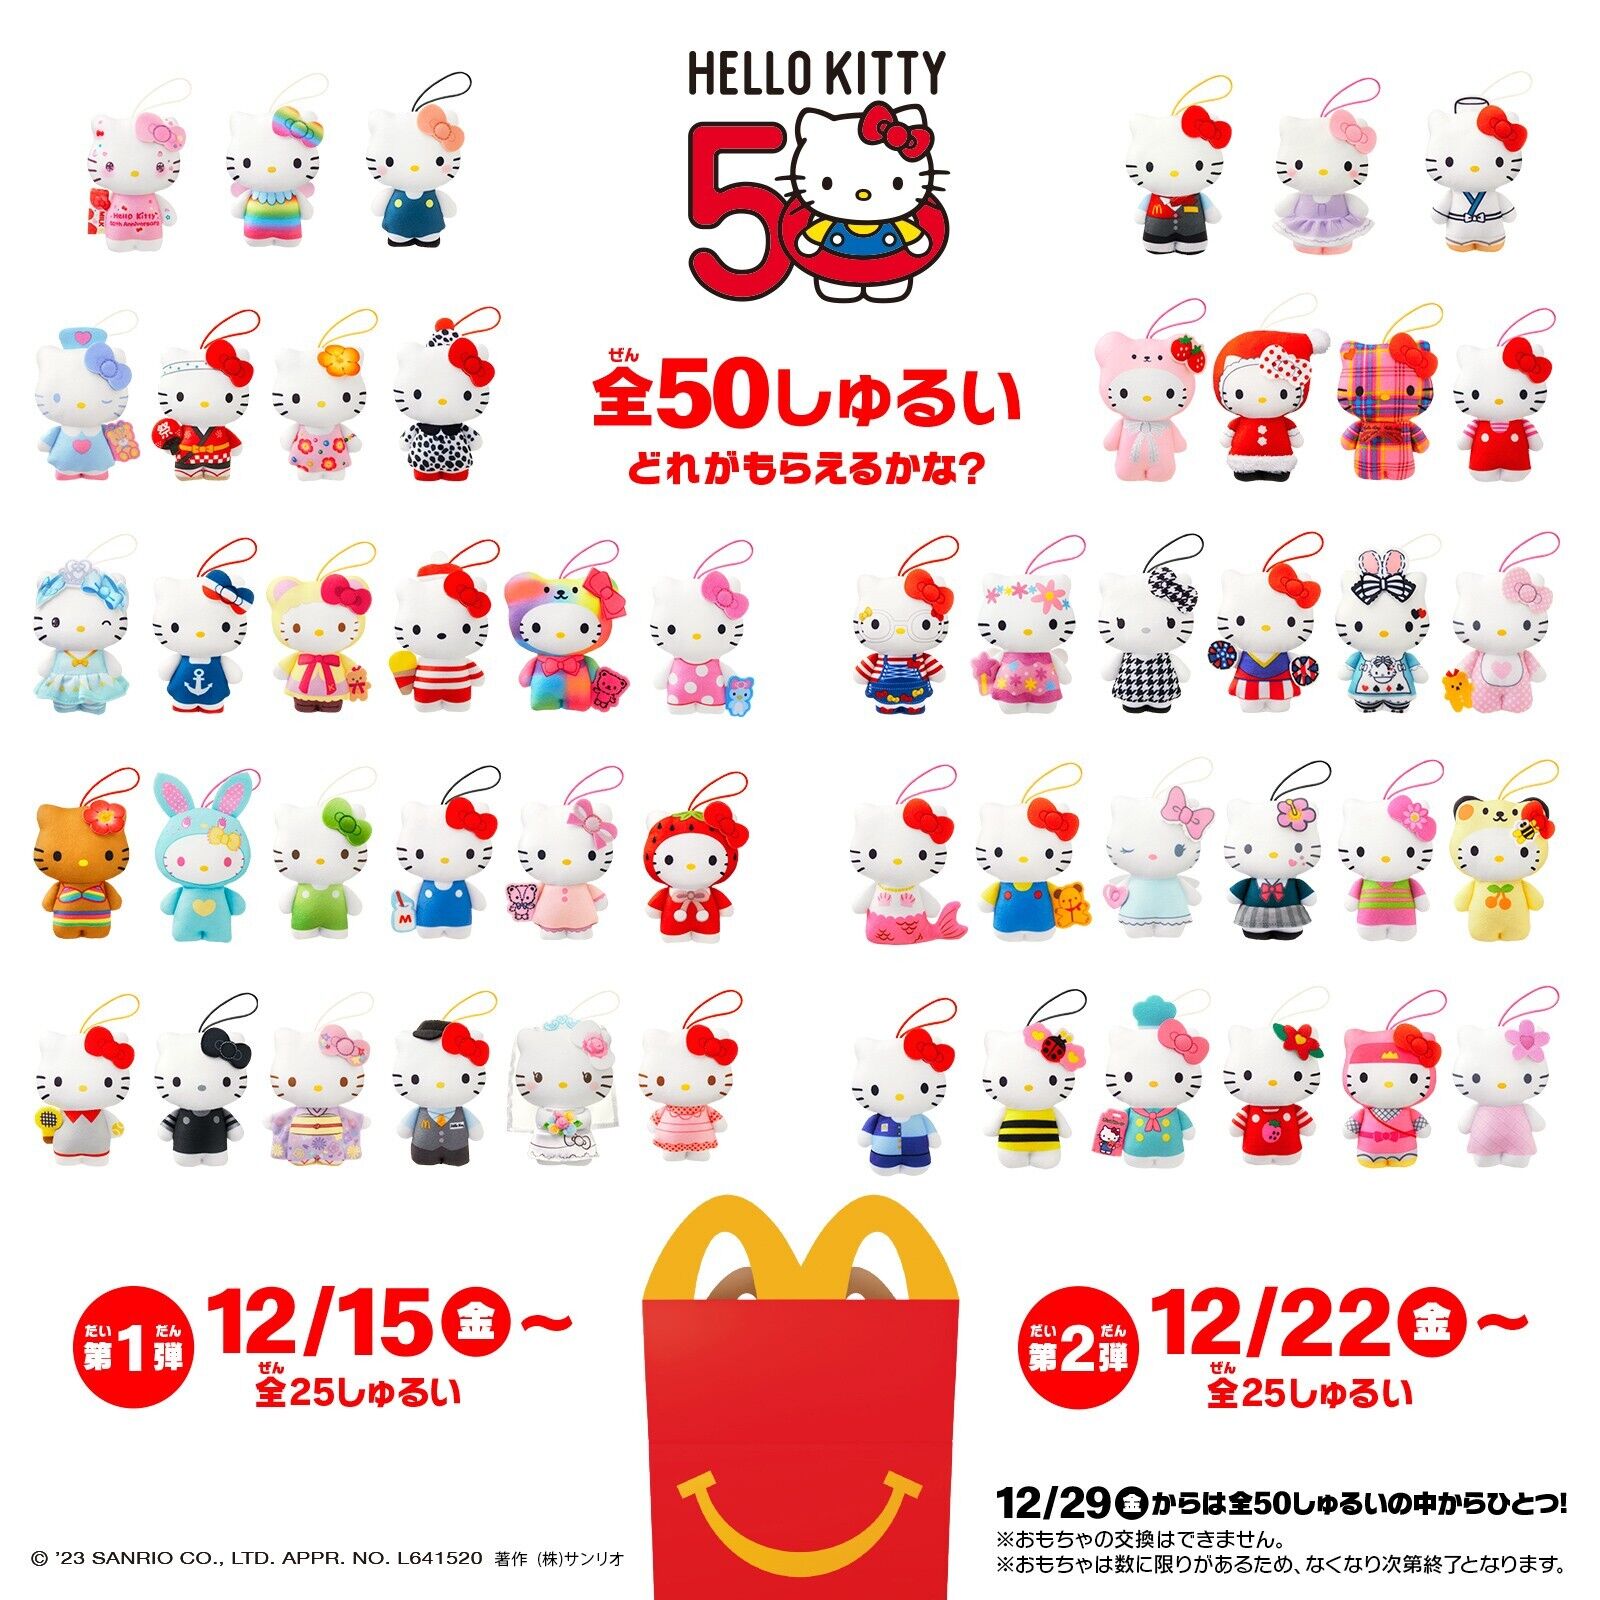 McDonald's Hello Kitty 50th Anniversary Happy Set Toy 50 types Complete New